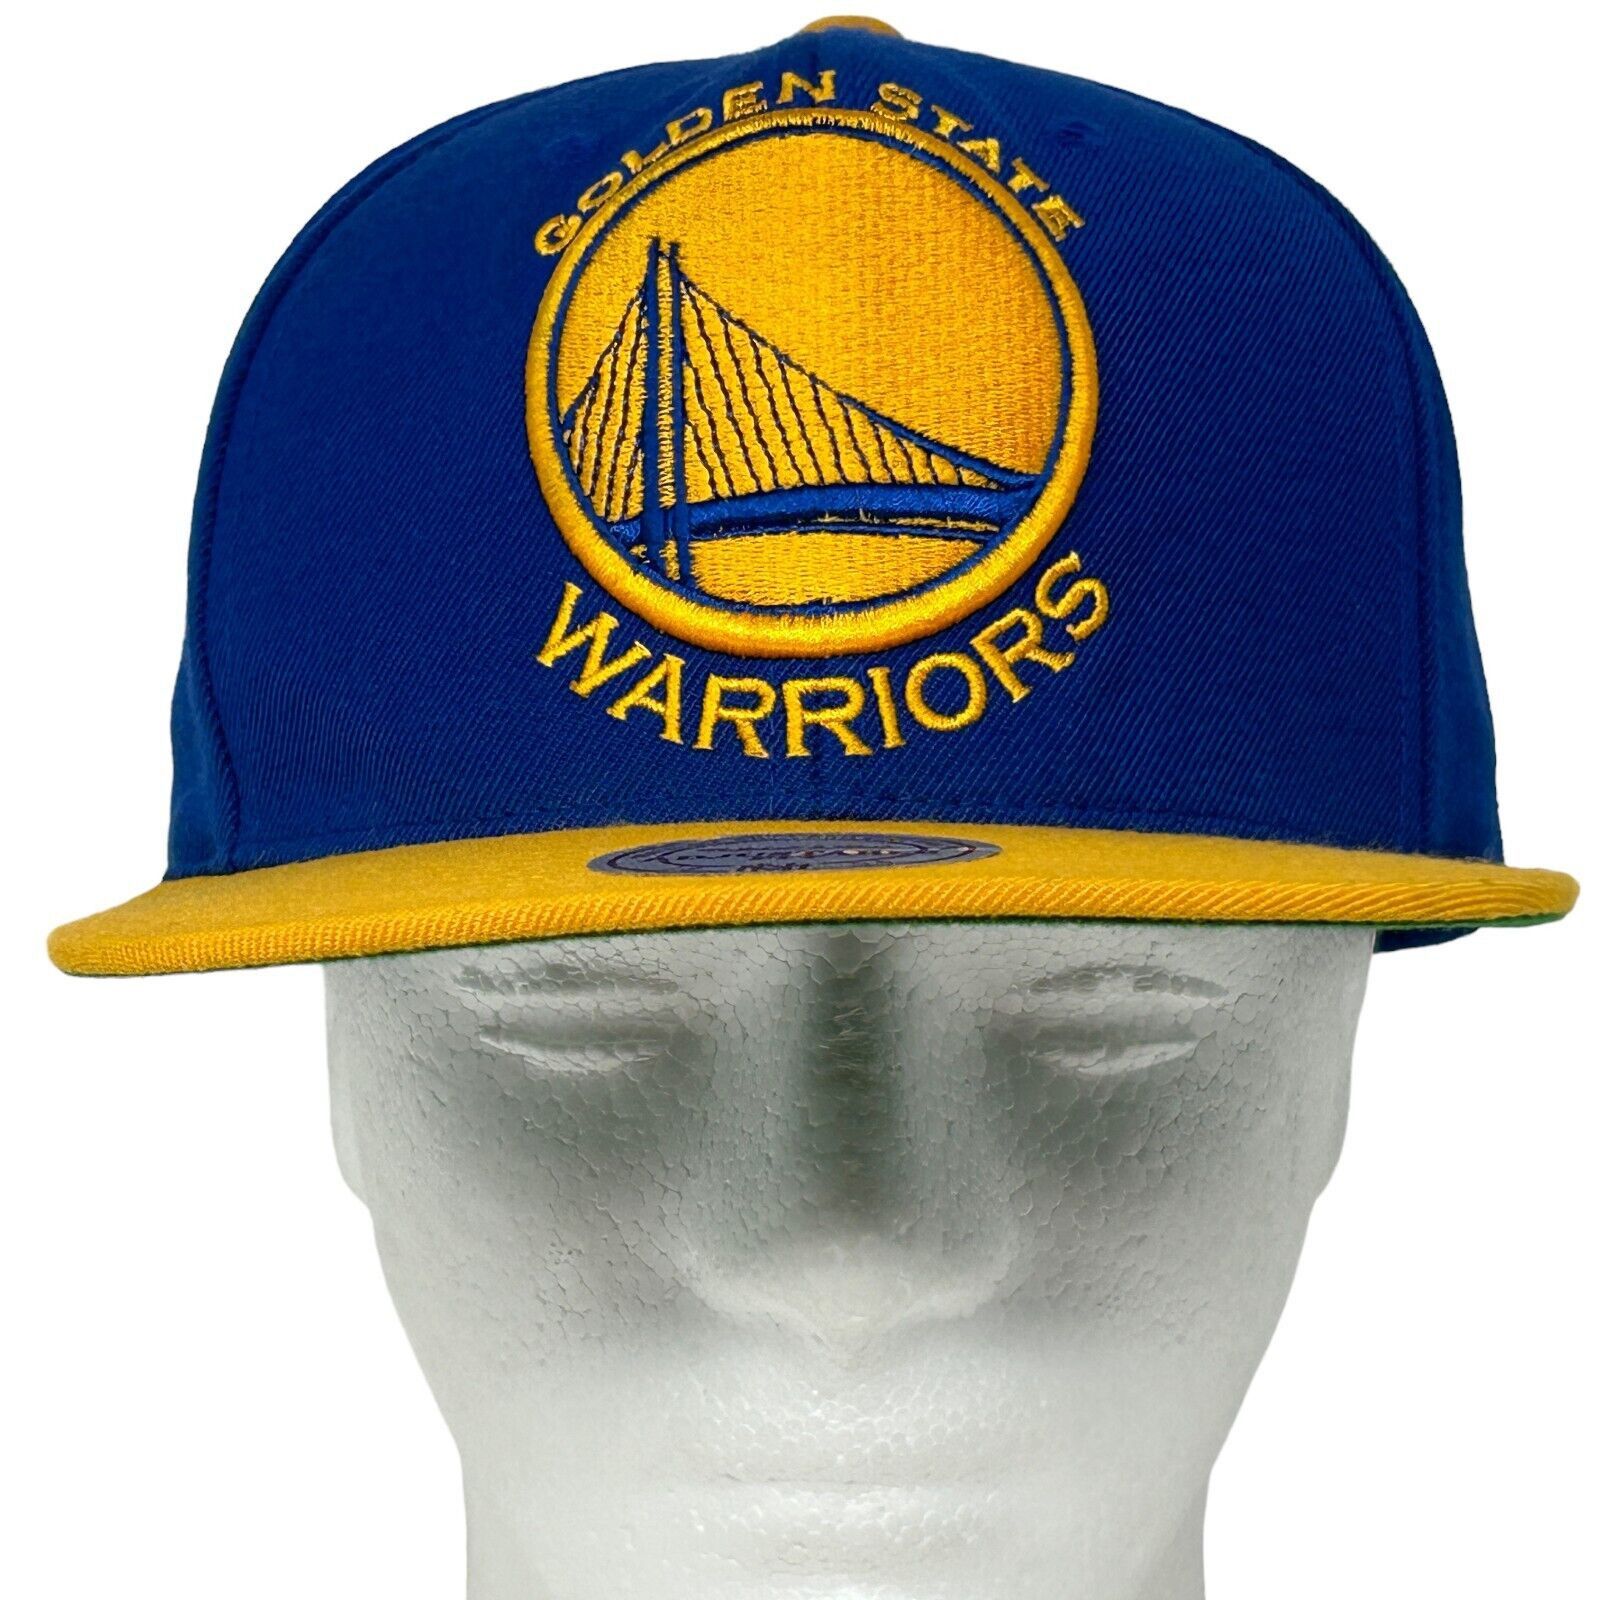 Mitchell & Ness Golden State Warriors Hat Blue Yellow NBA Baseball Cap Size ONE SIZE - 2 Preview